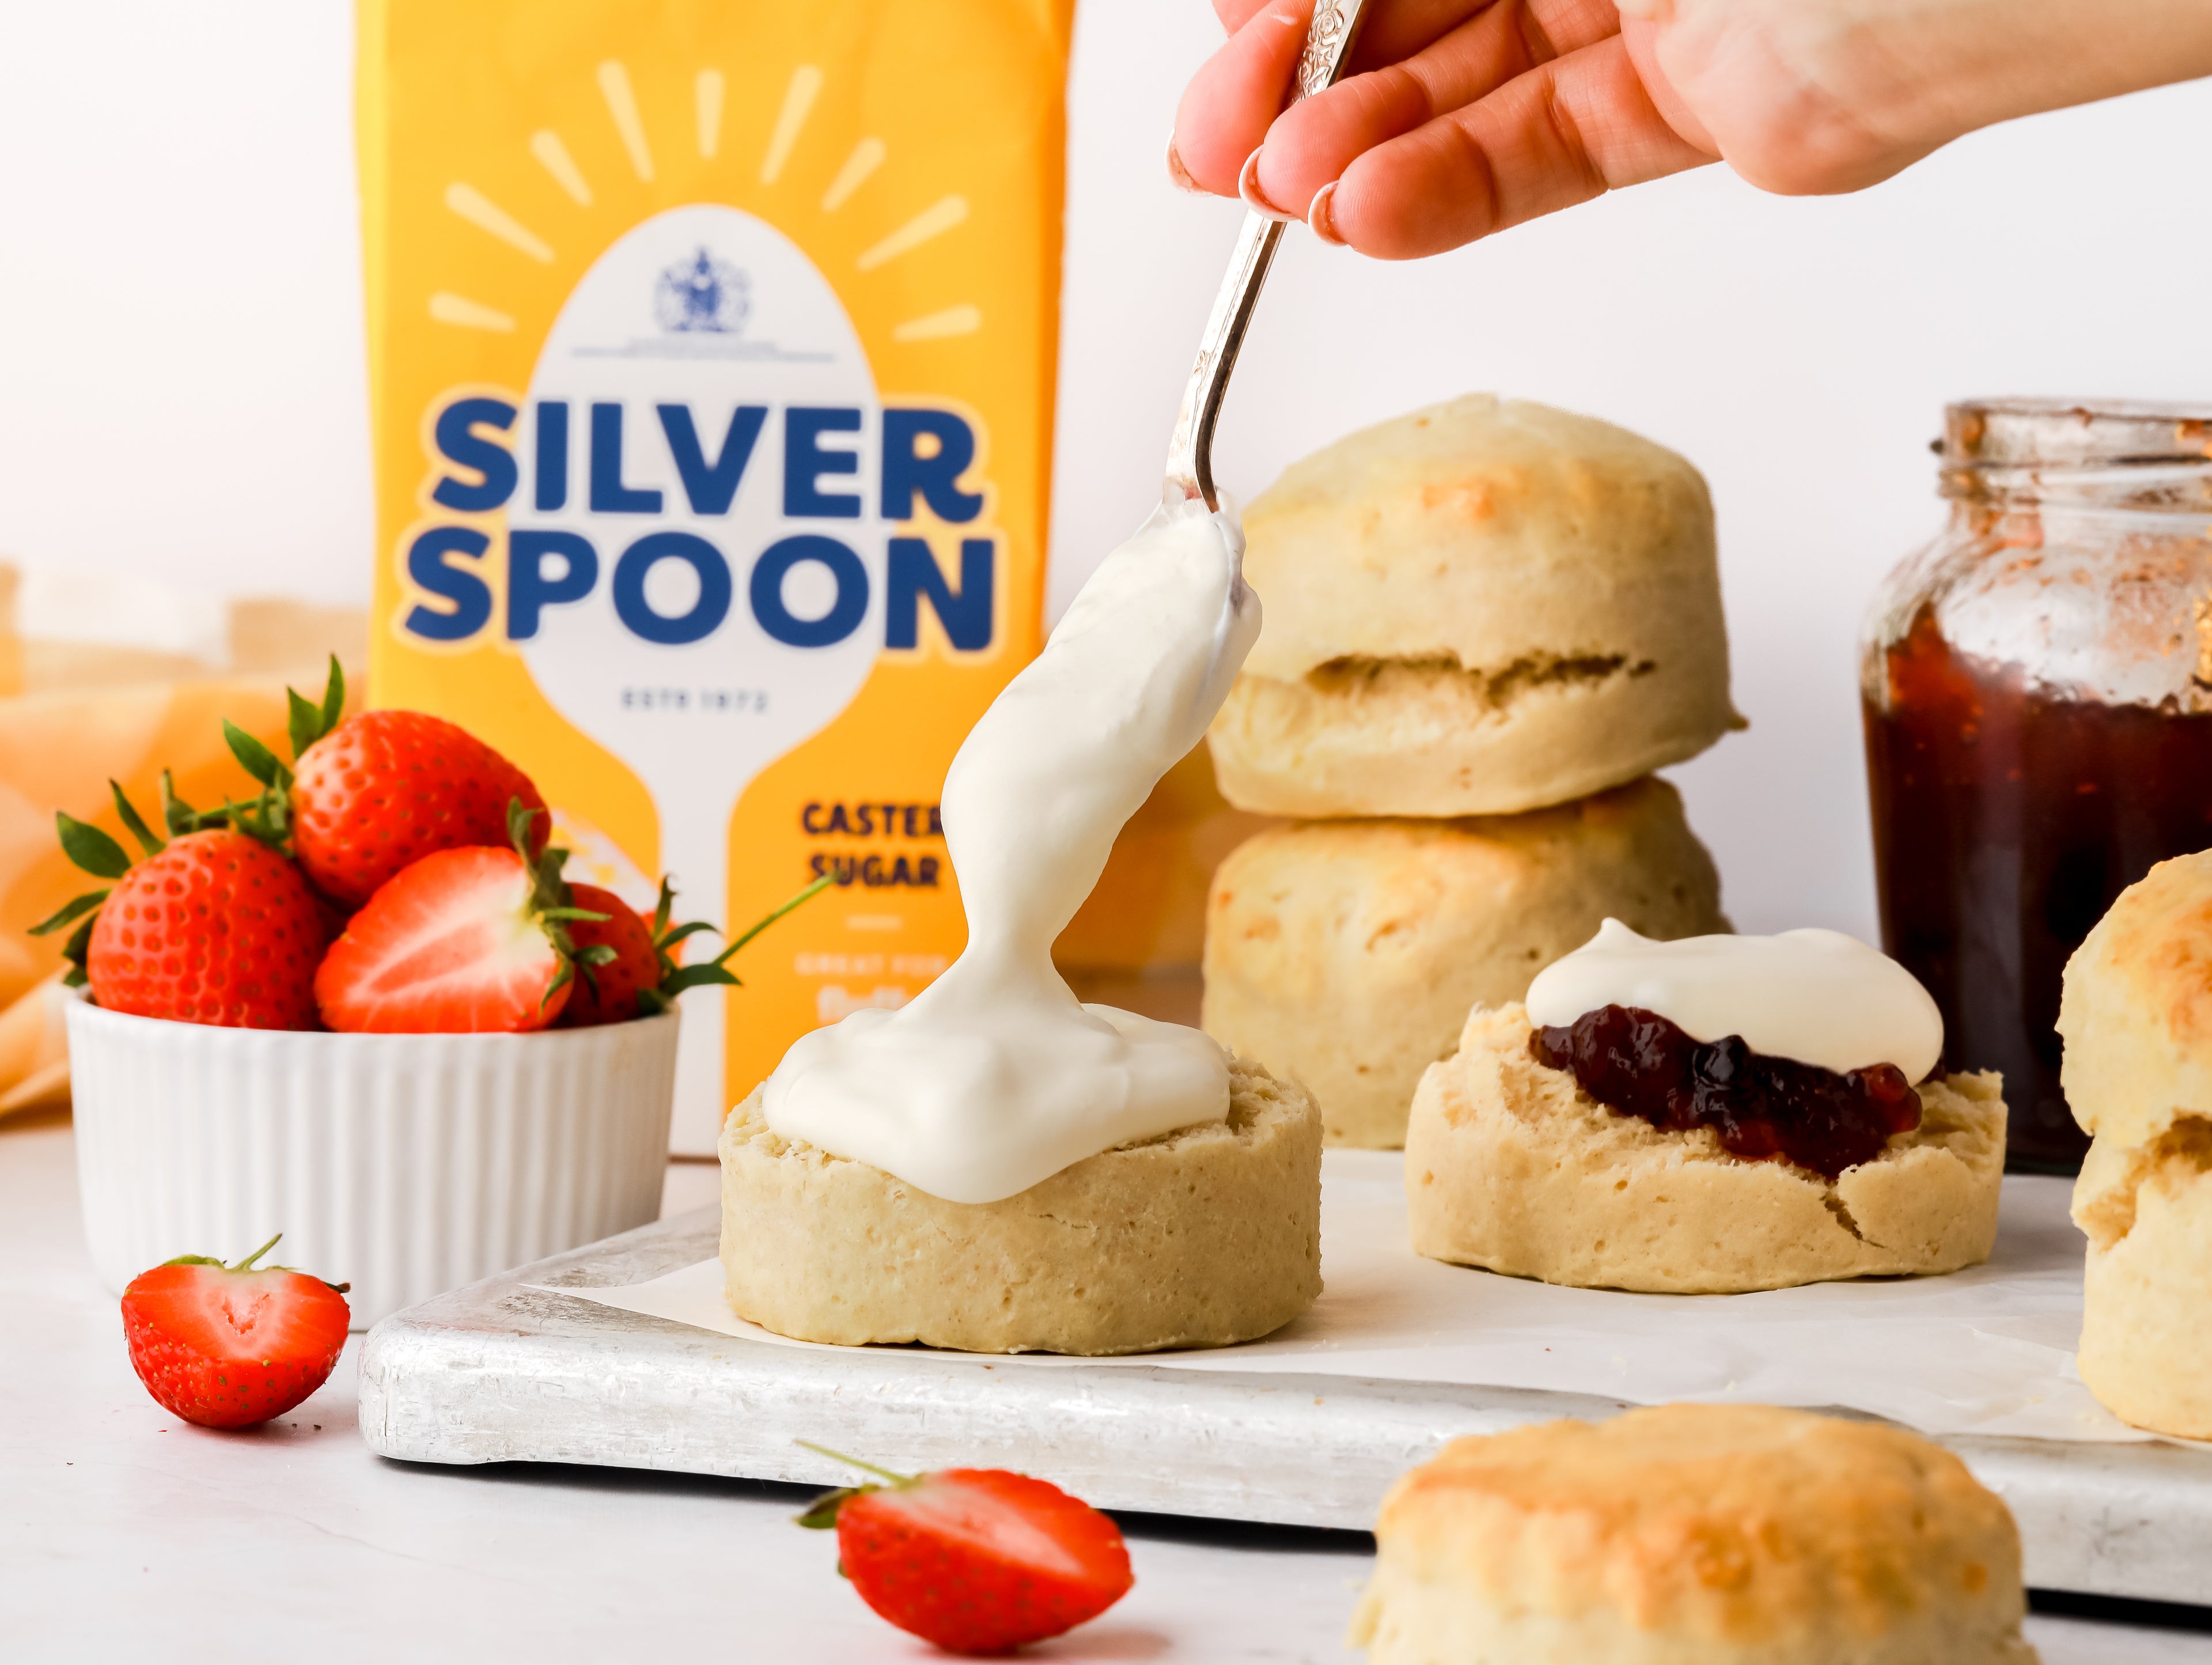 Homemade scone split in two with a dollop of jam and cream from a spoon with strawberries and caster sugar